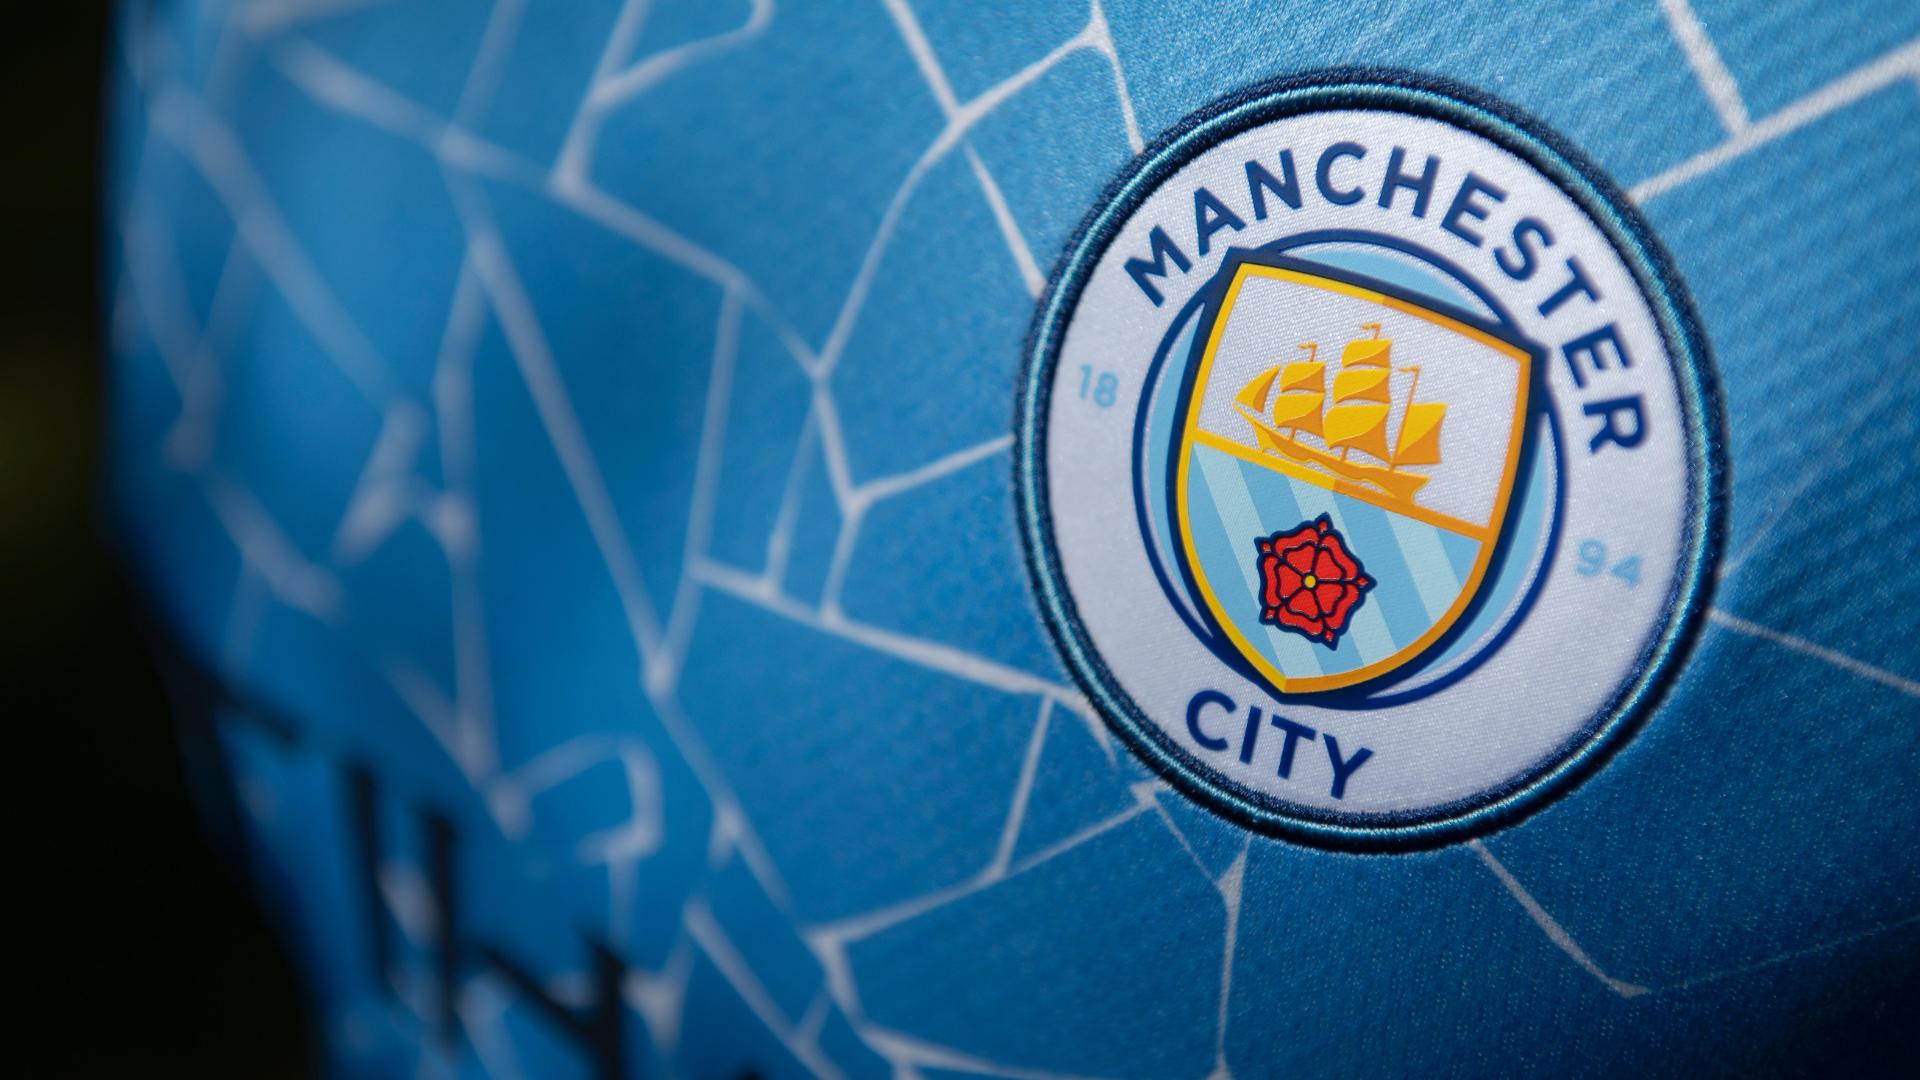 Football: Soccer-Premier League charges Man City over alleged financial  rule breaches